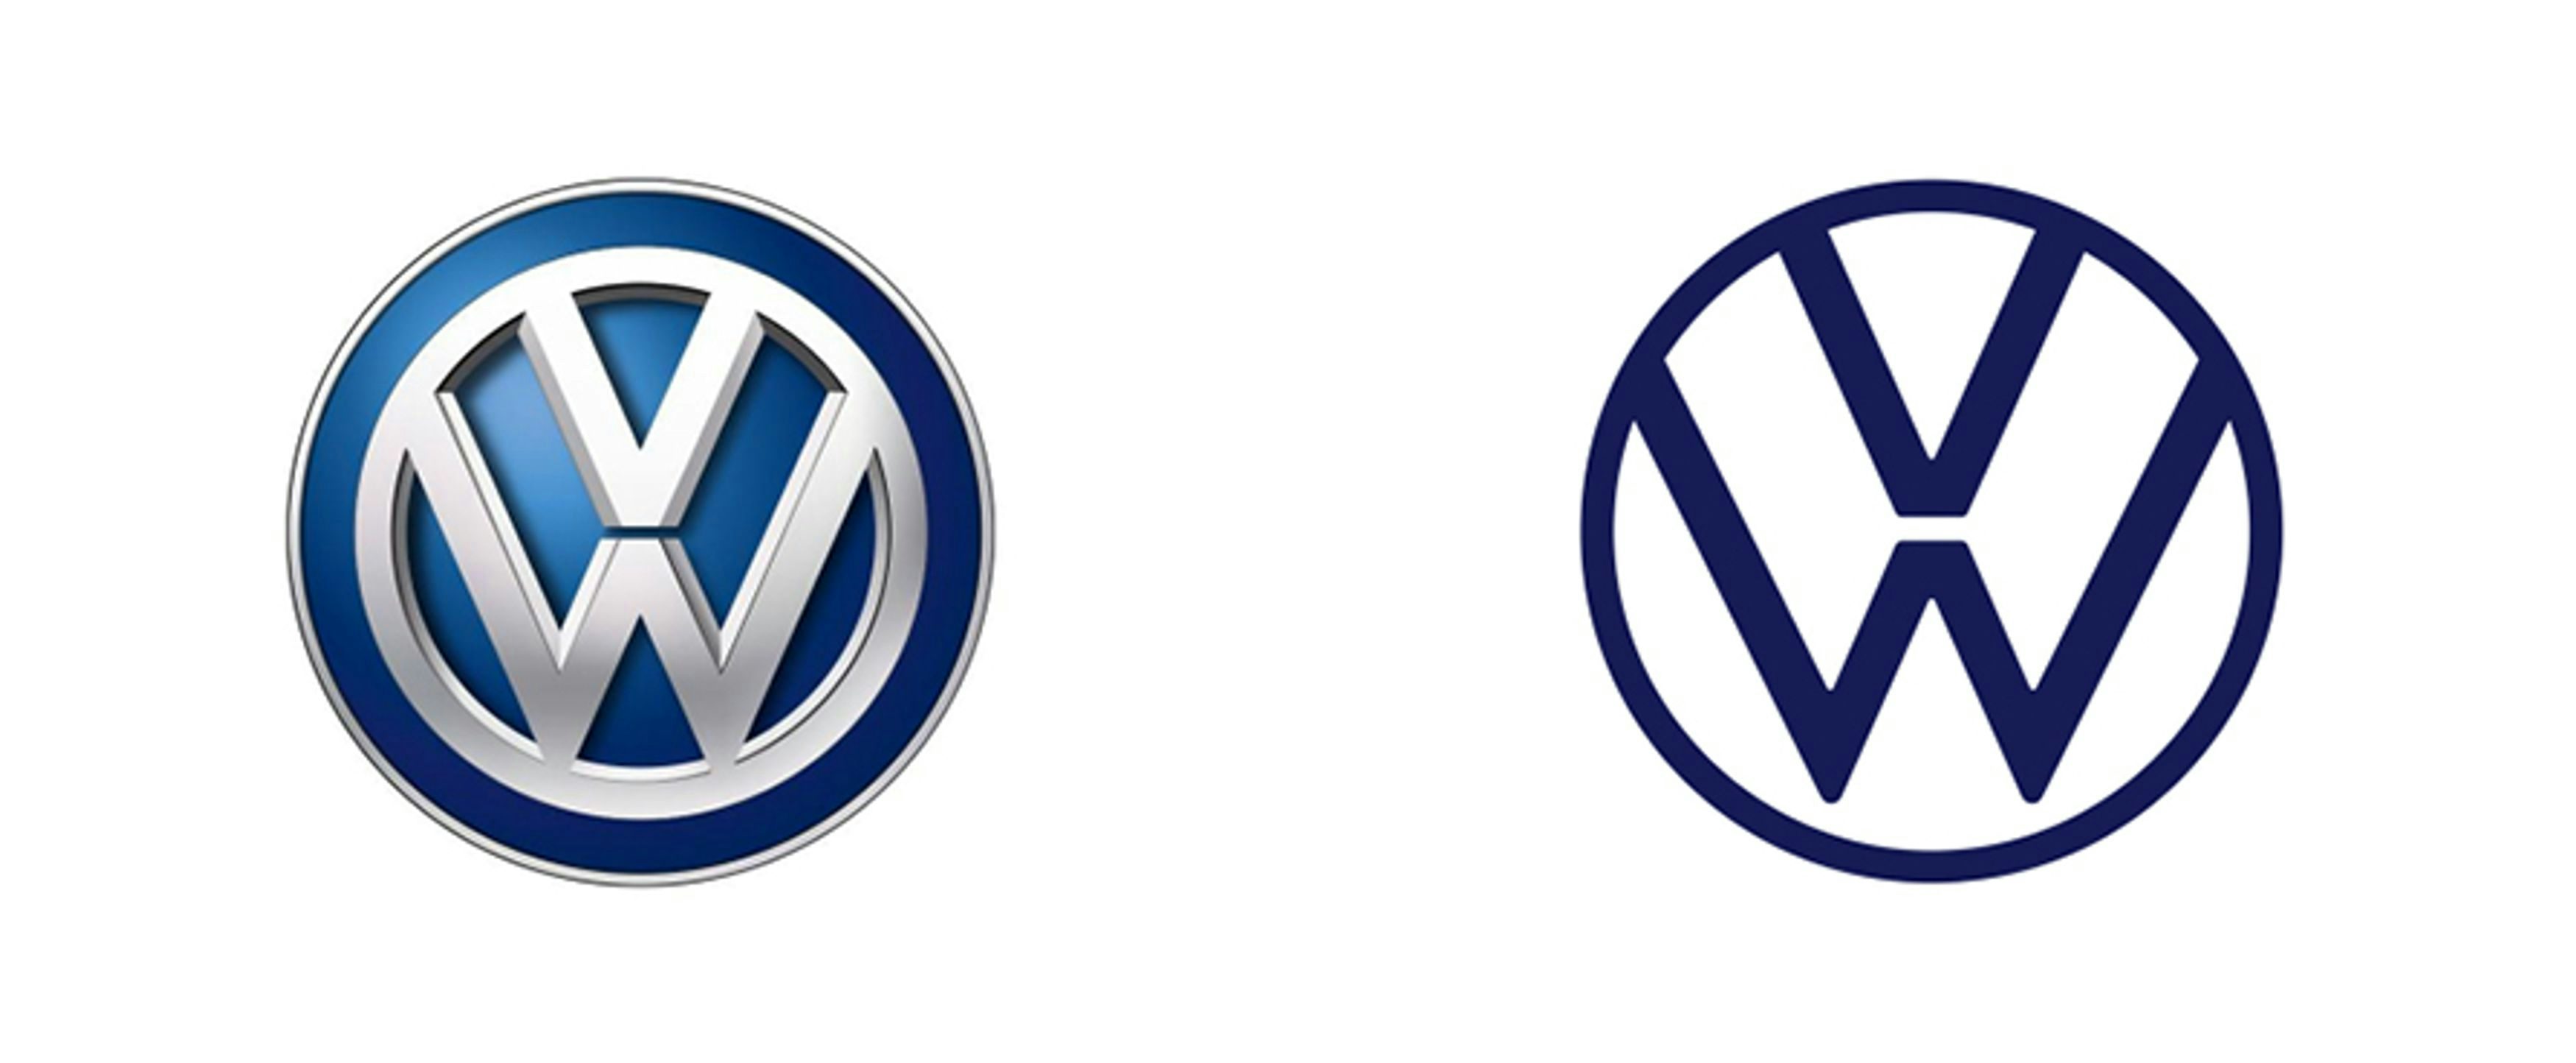 Two Volkswagen logos side by side; the one on the left has a three-dimensional design with blue and silver colours, while the one on the right has a flat, monochrome design in navy blue.